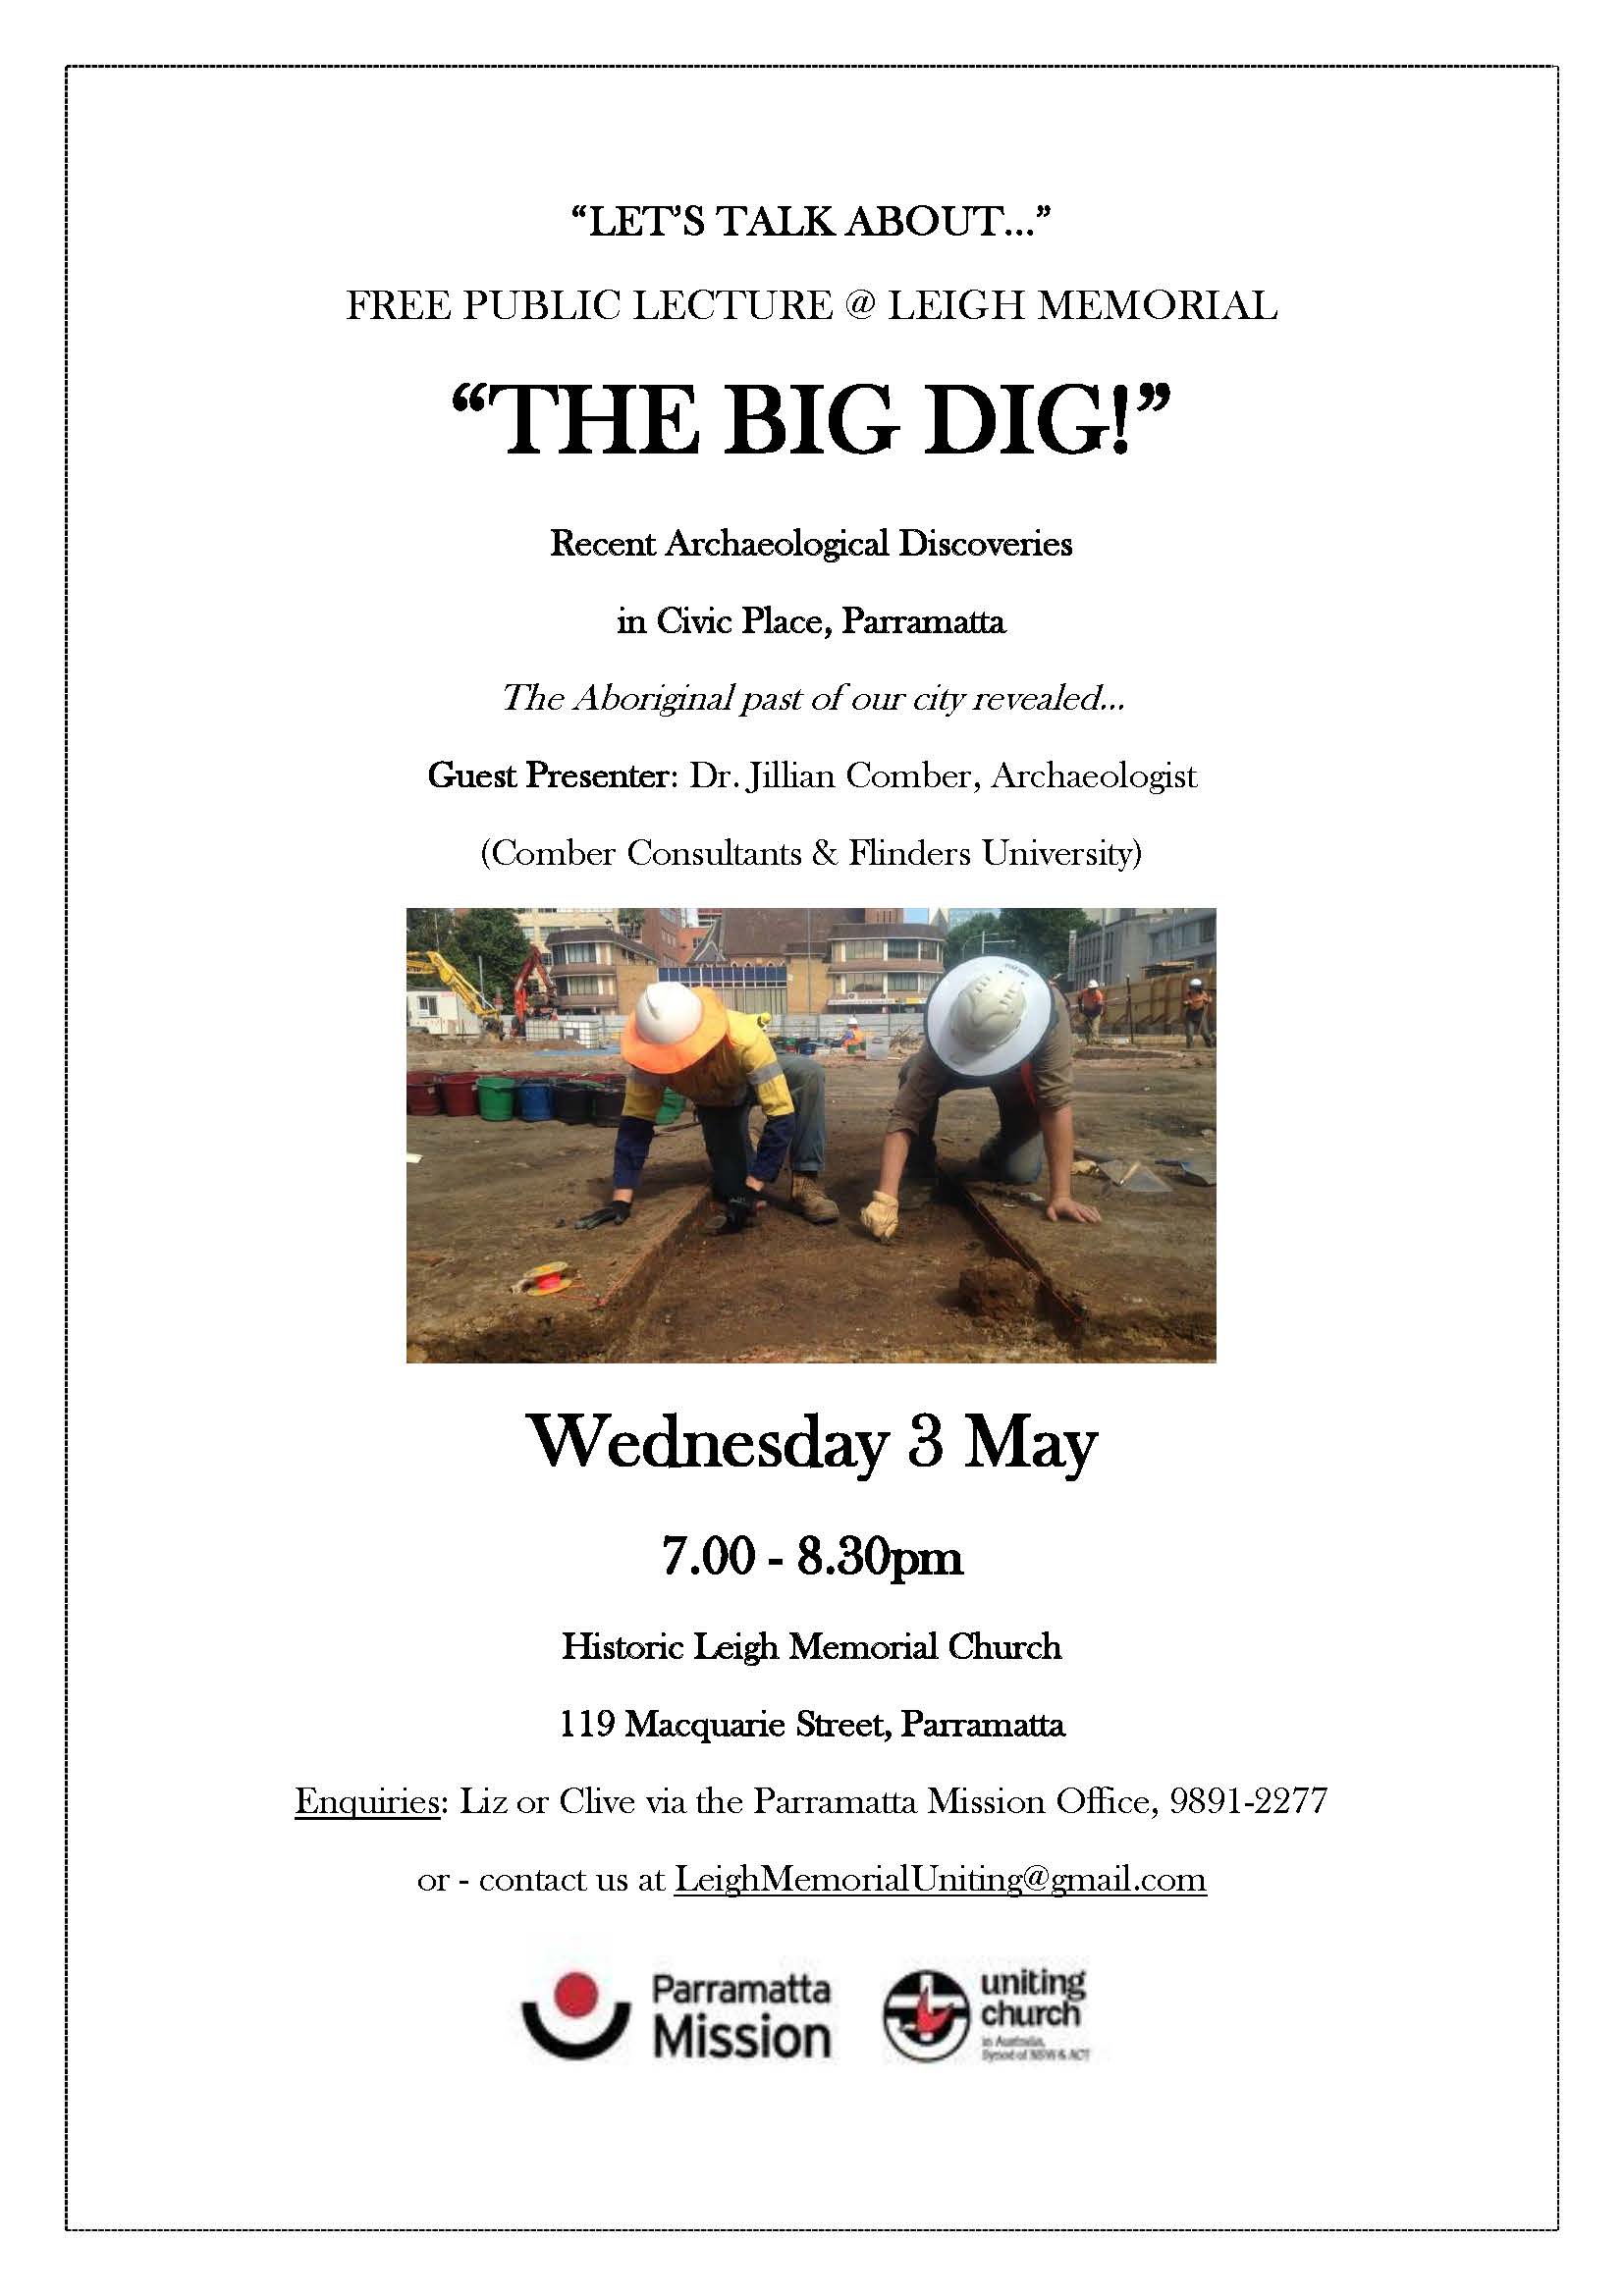 SPECIAL EVENT - THE BIG DIG docx UPDATED VERSION docx (A)